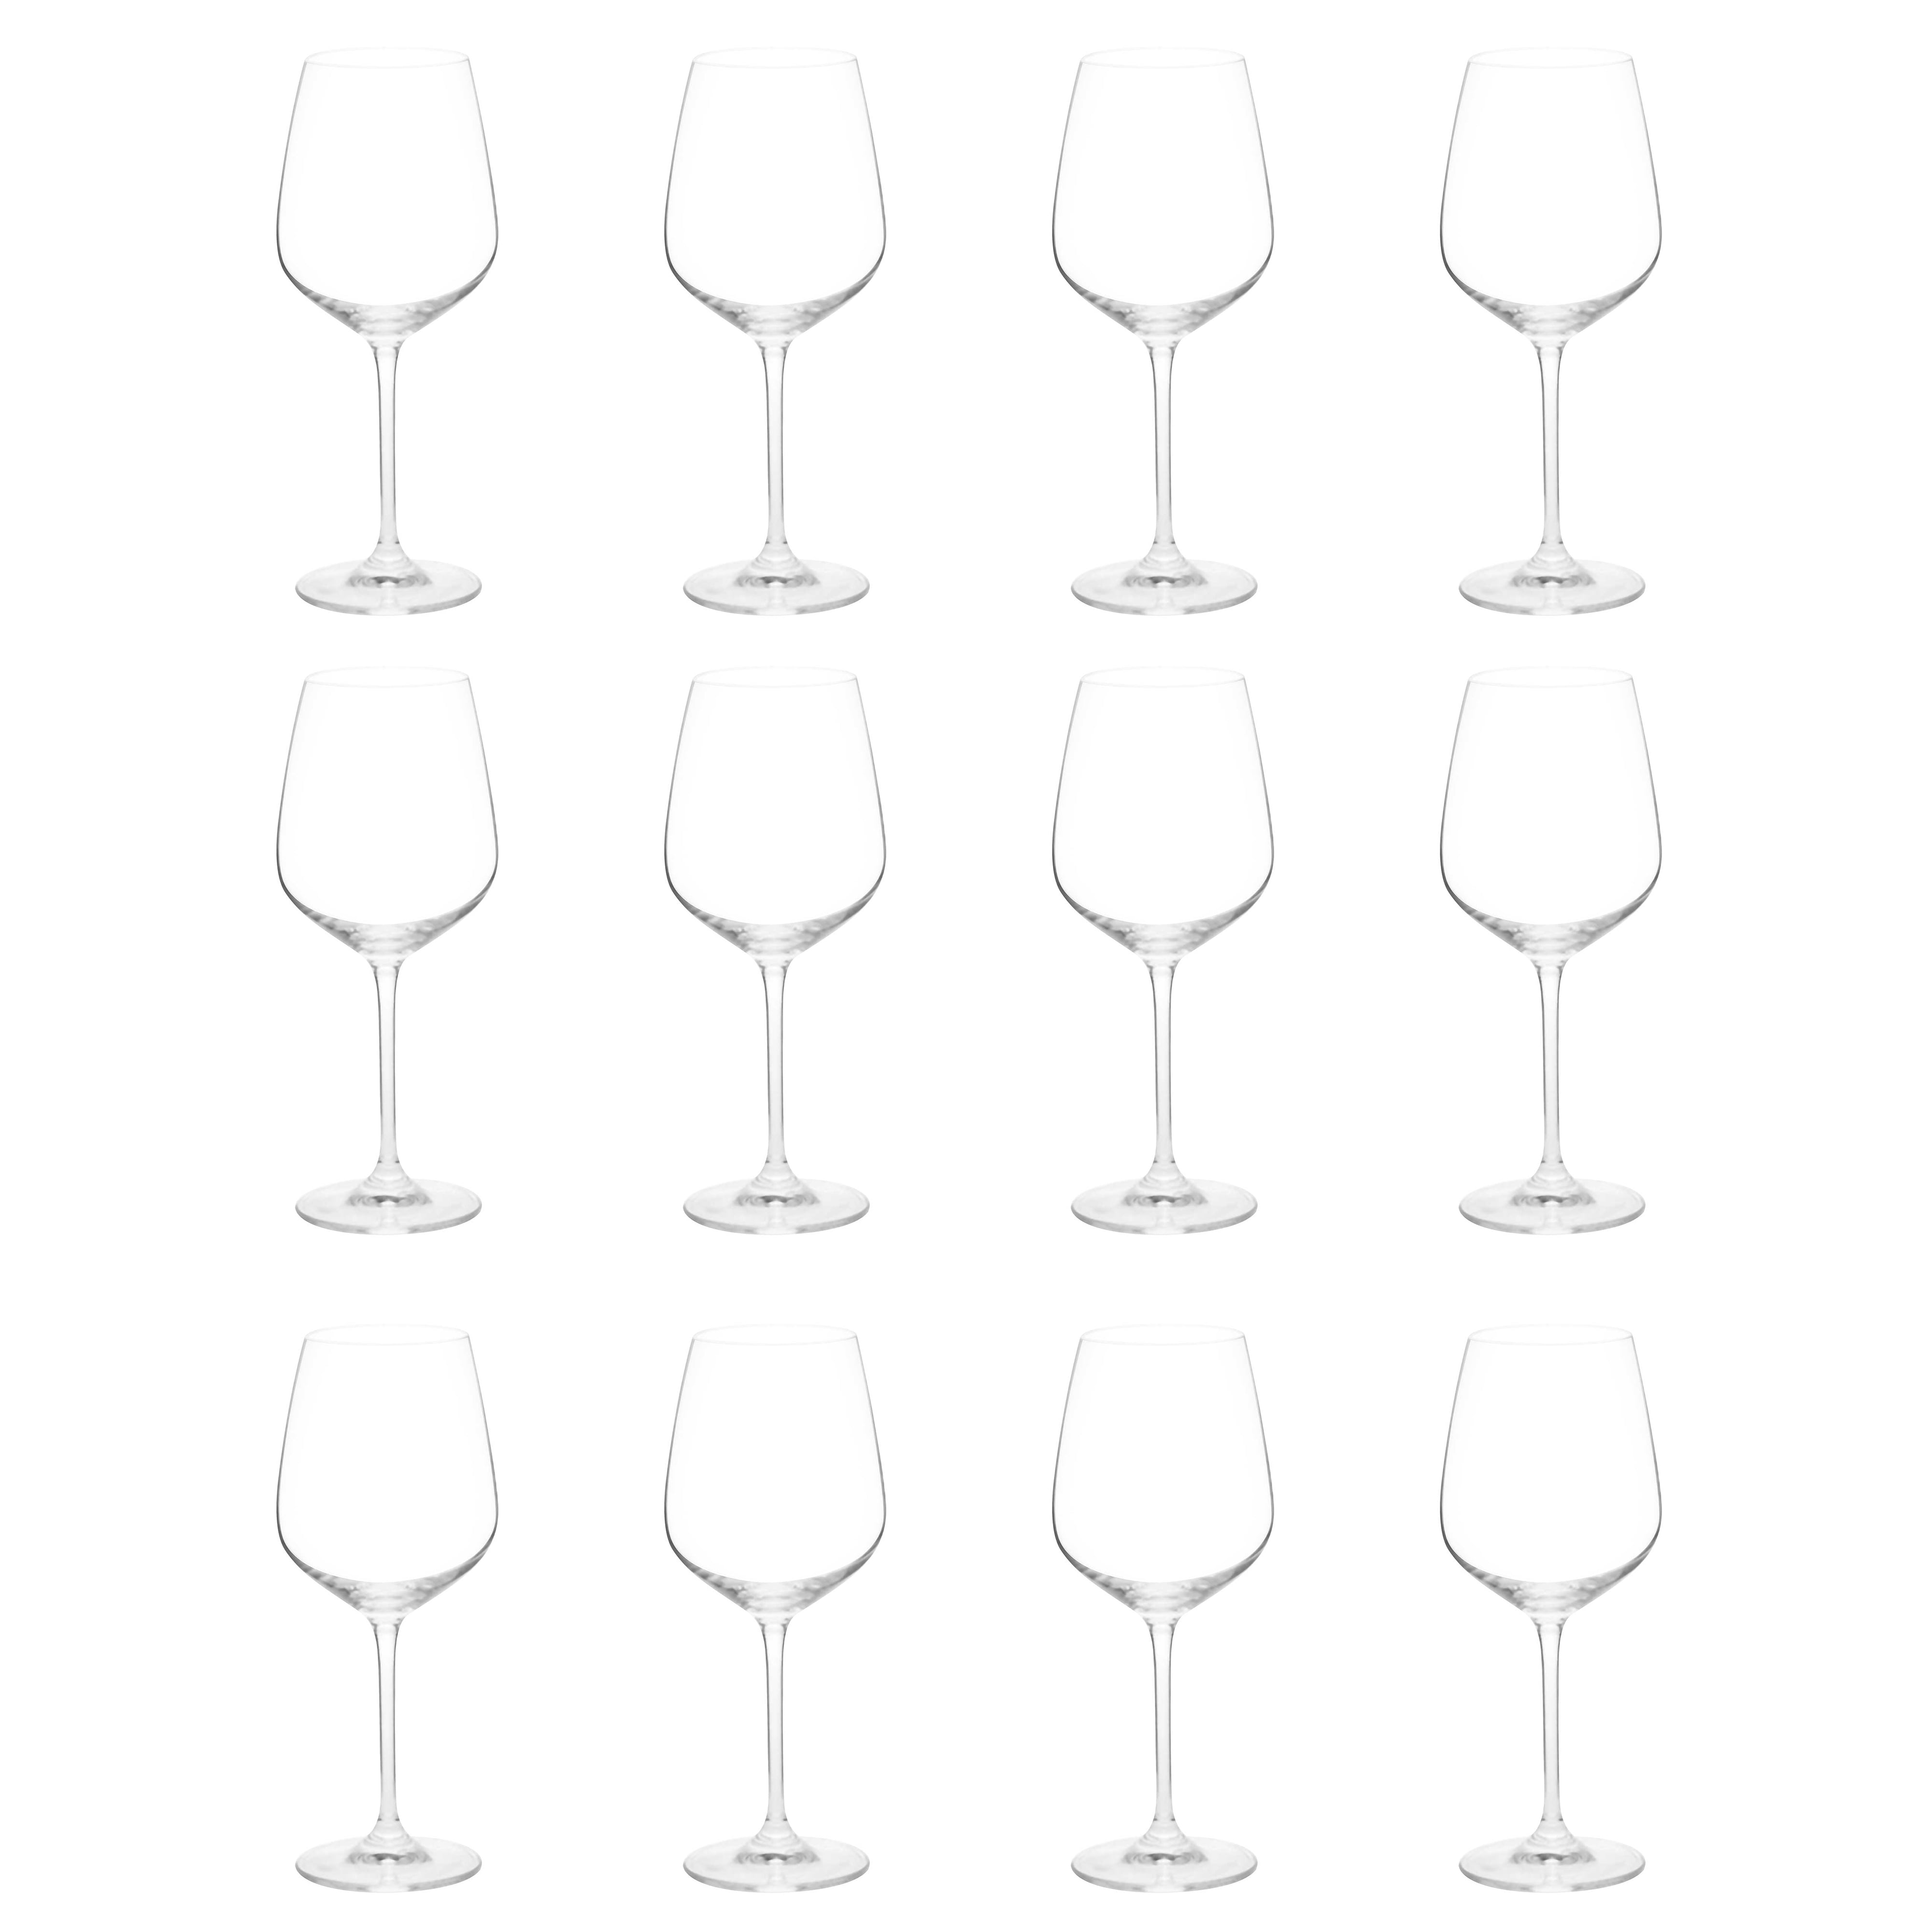 Cadamada 12oz Wine Glasses,Crystal Glass with Stem for Red or White Wine,  High-end Banquet, Party, Bar, Wedding, Gift (12 pcs)